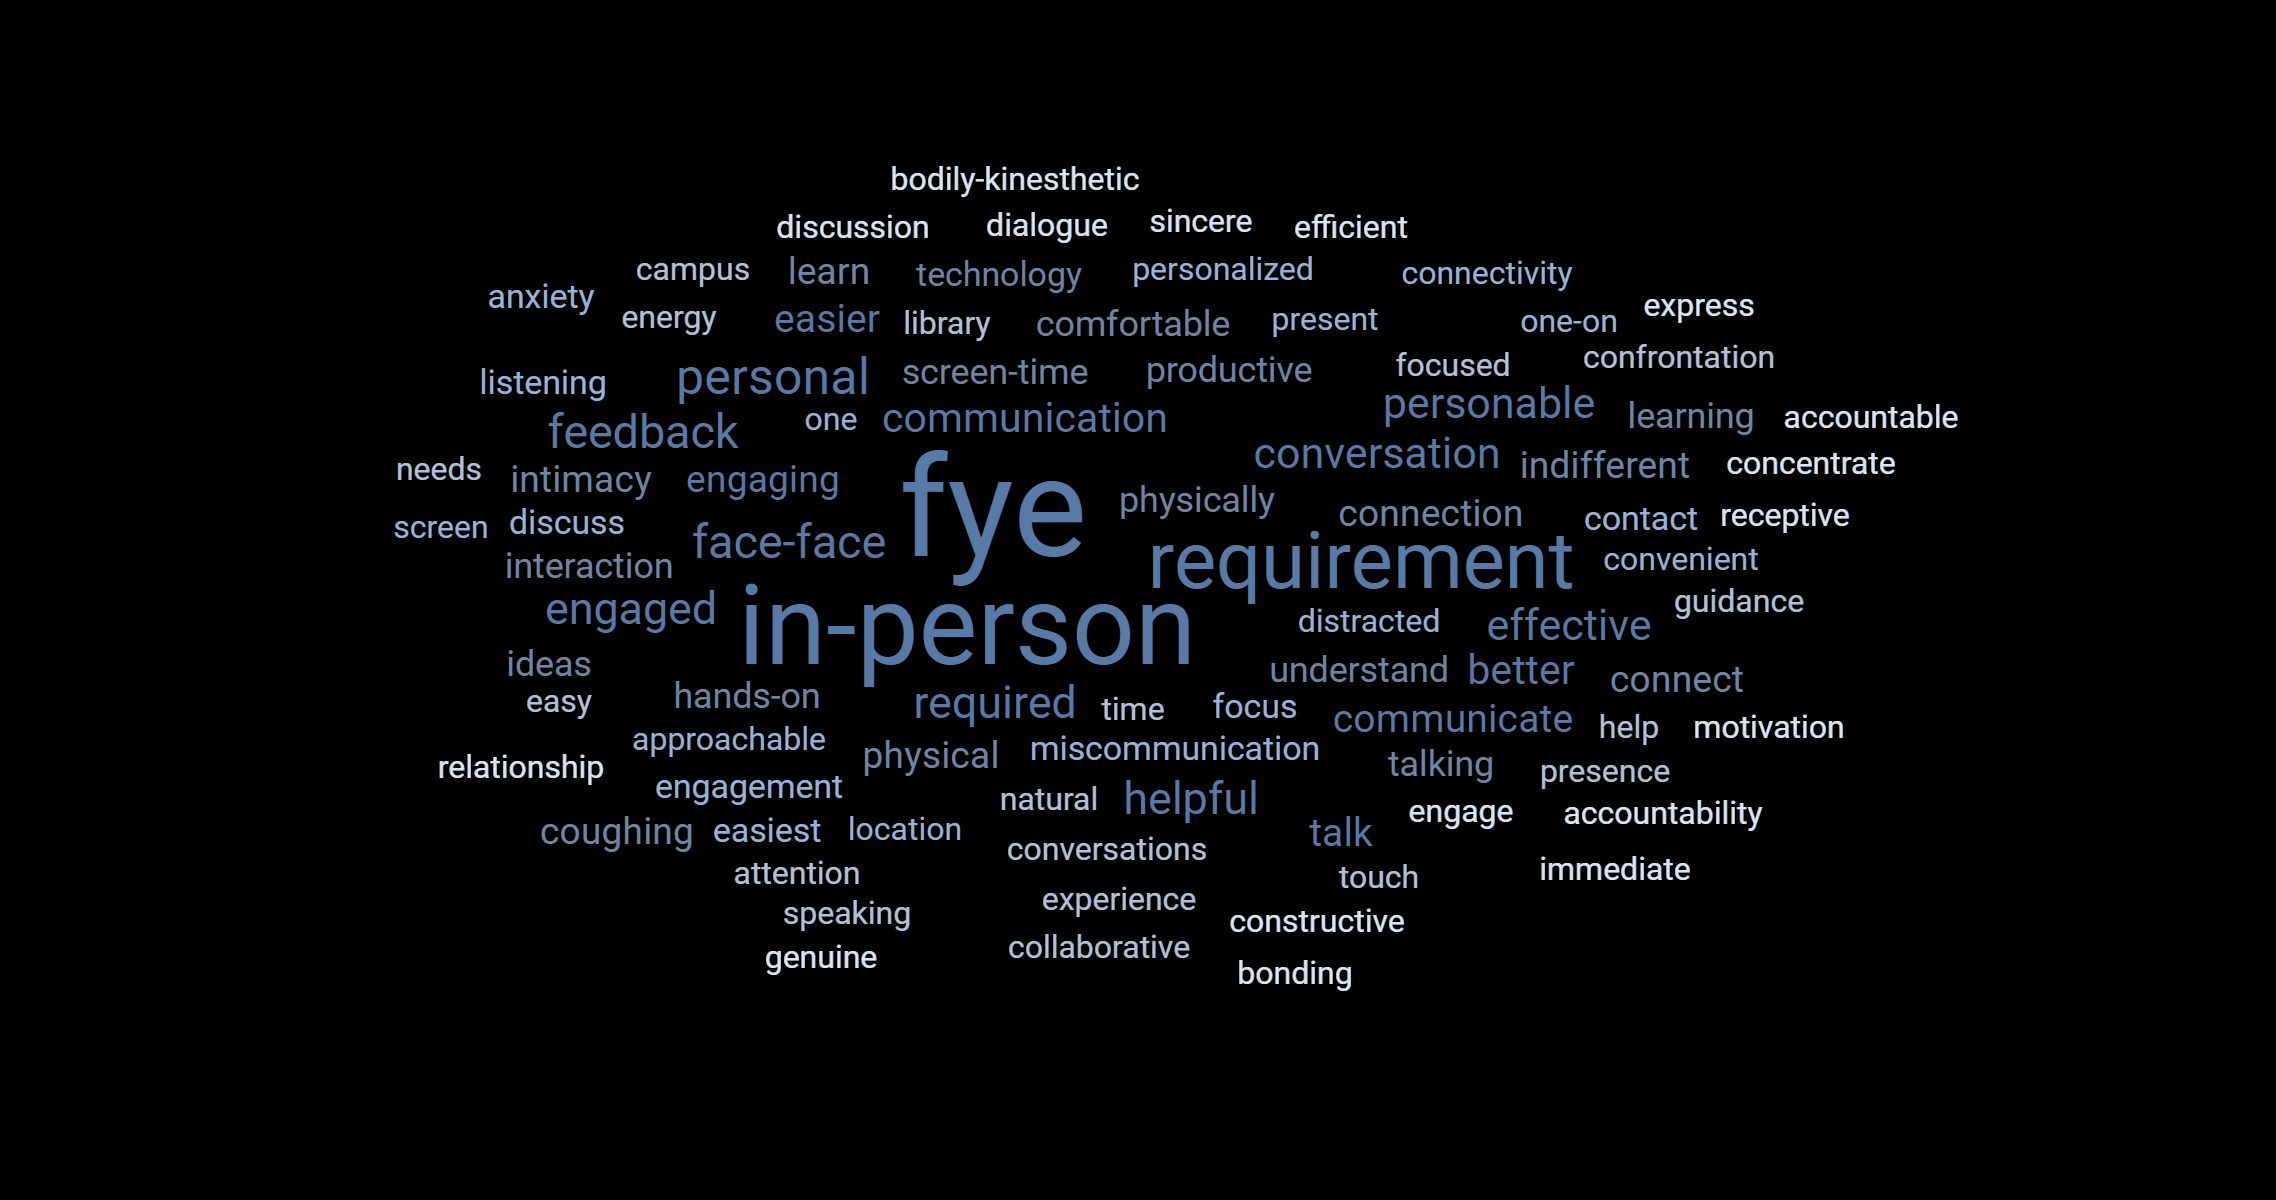 A word cloud composed using data from open-ended fields in In-person writers' survey responses. The most prominent words in the cloud are: FYE (first-year experience), in-person, requirement, effective, engaged, face-to-face, personal, personable, feedback, conversation, helpful, and required.